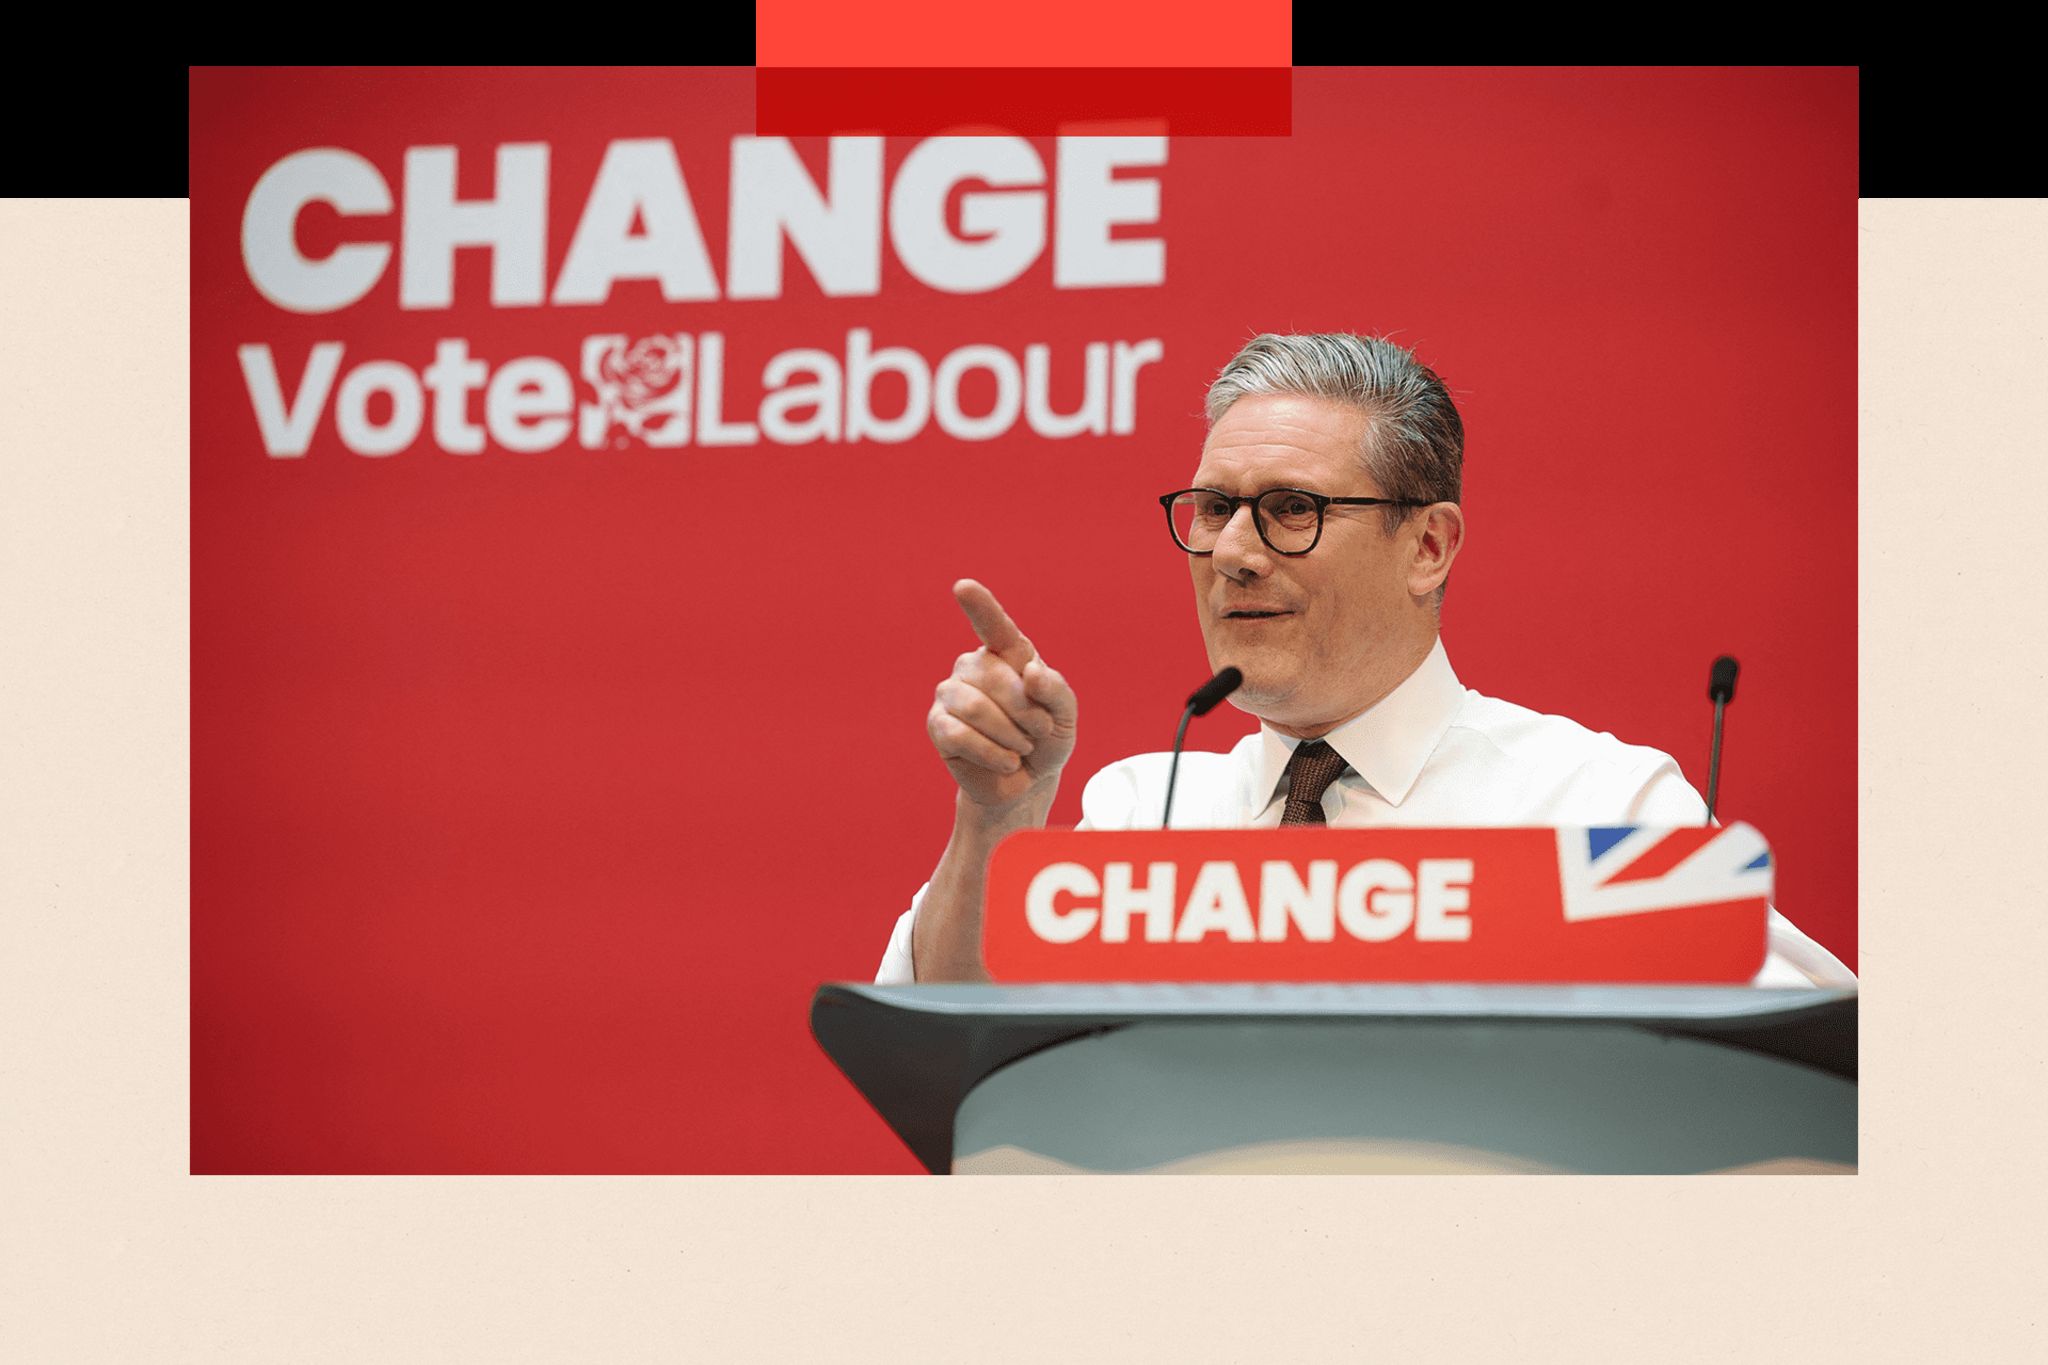 Labour's Keir Starmer speaking in front of a sign that reads "Change Vote Labour"